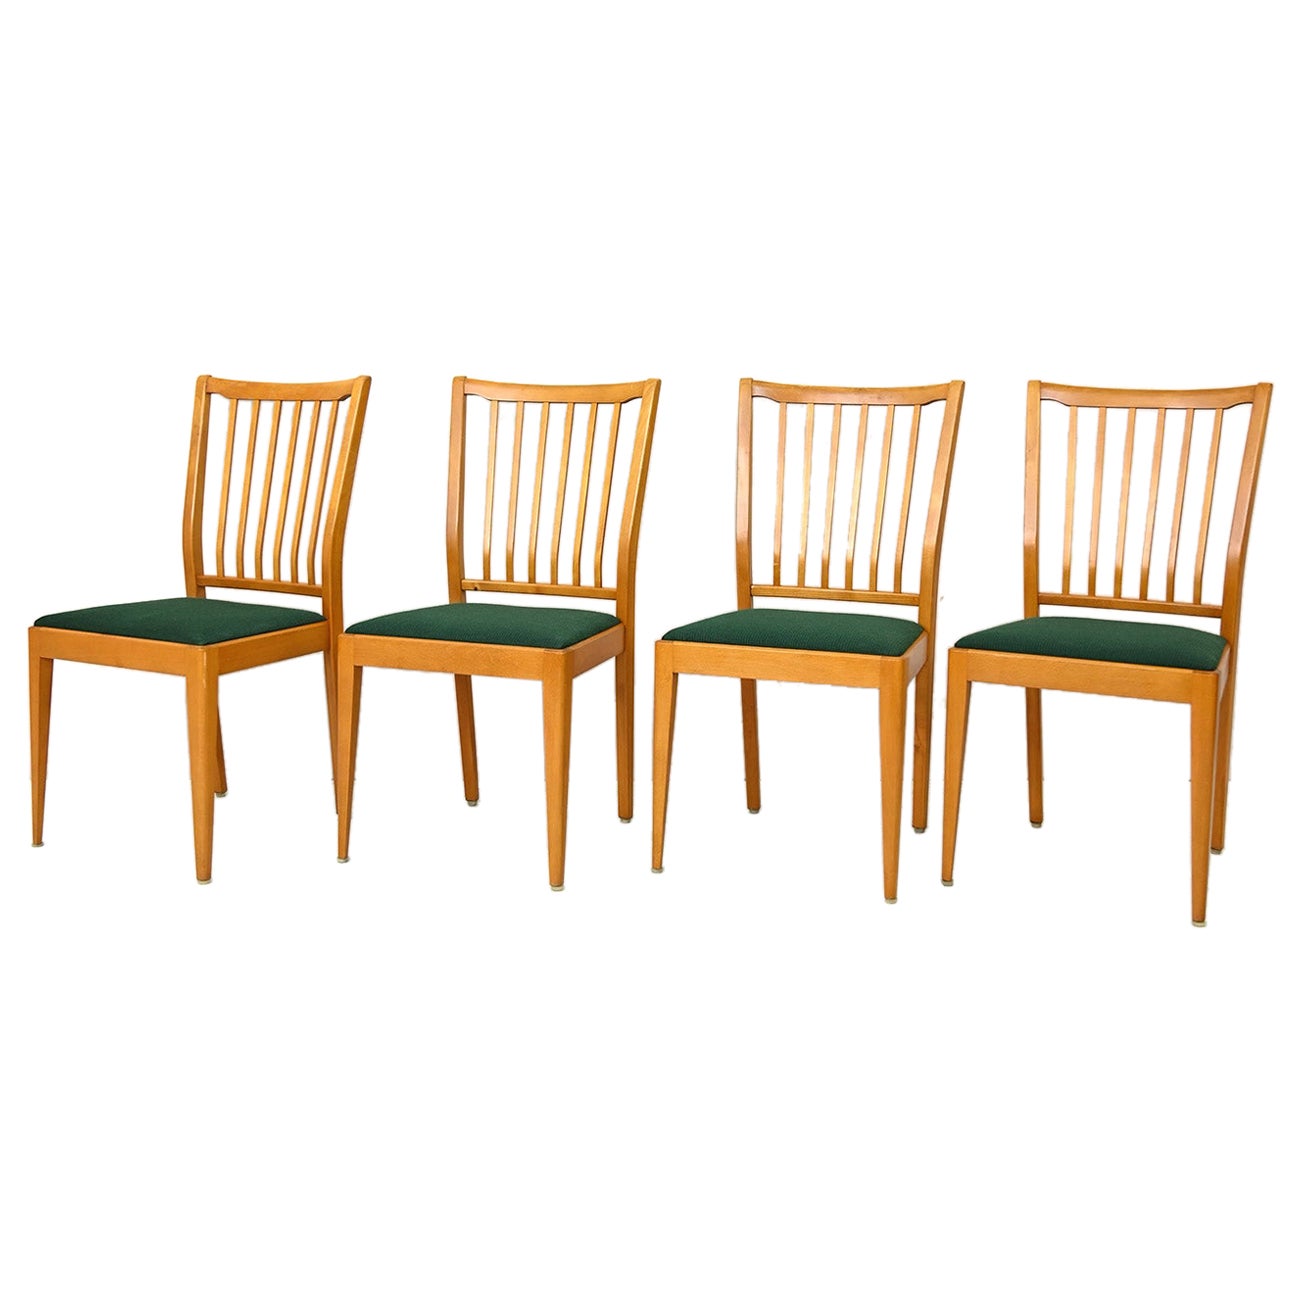 Swedish Chairs from the 1950s